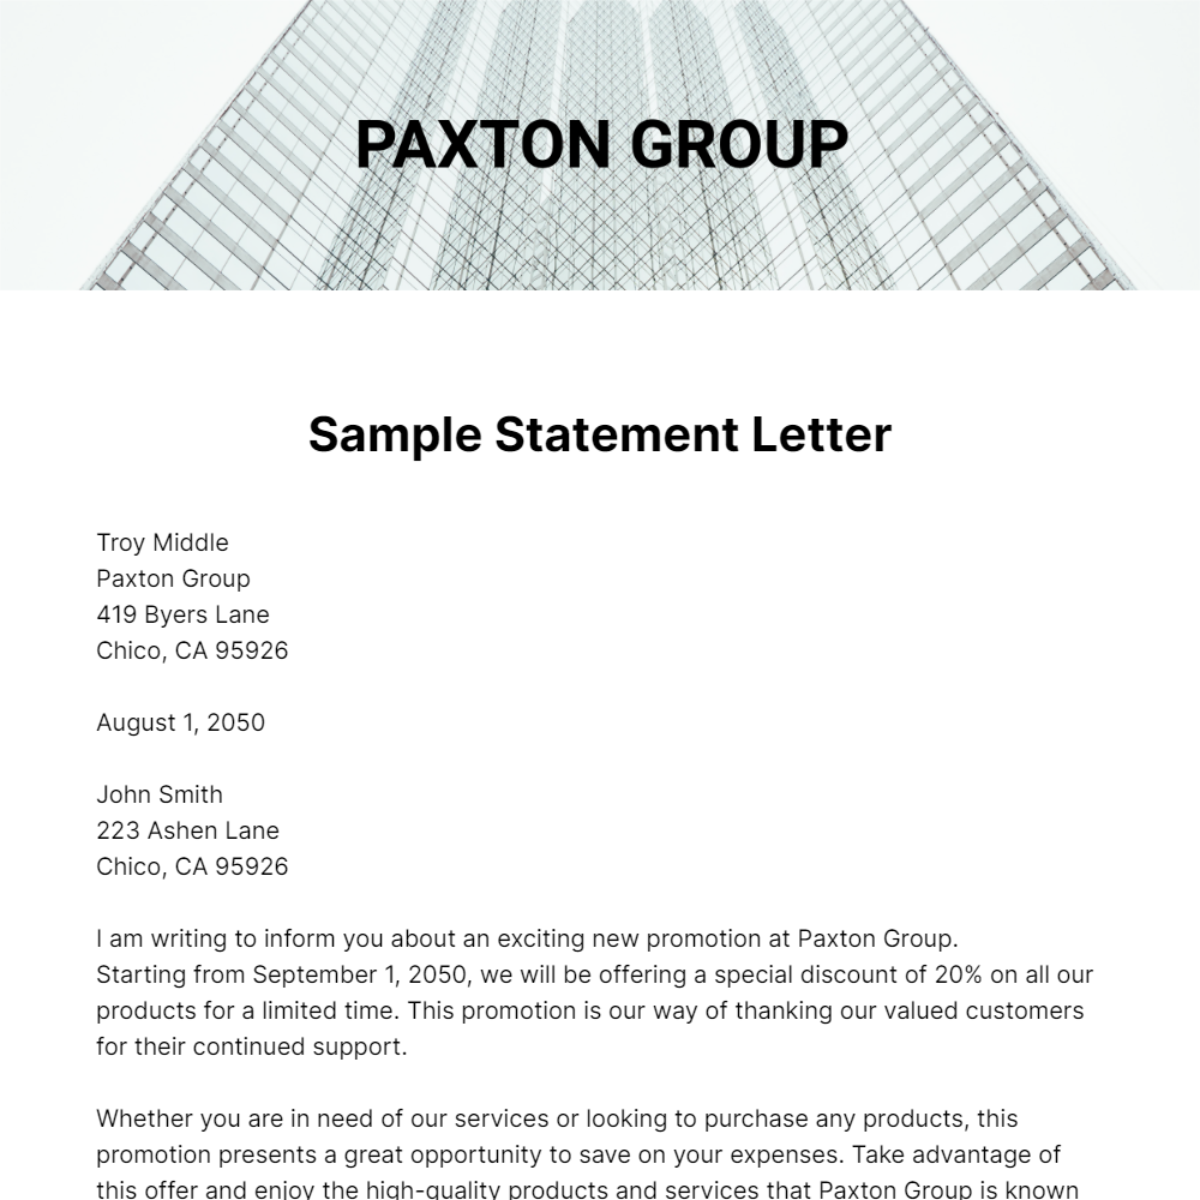 Sample Statement Letter Template